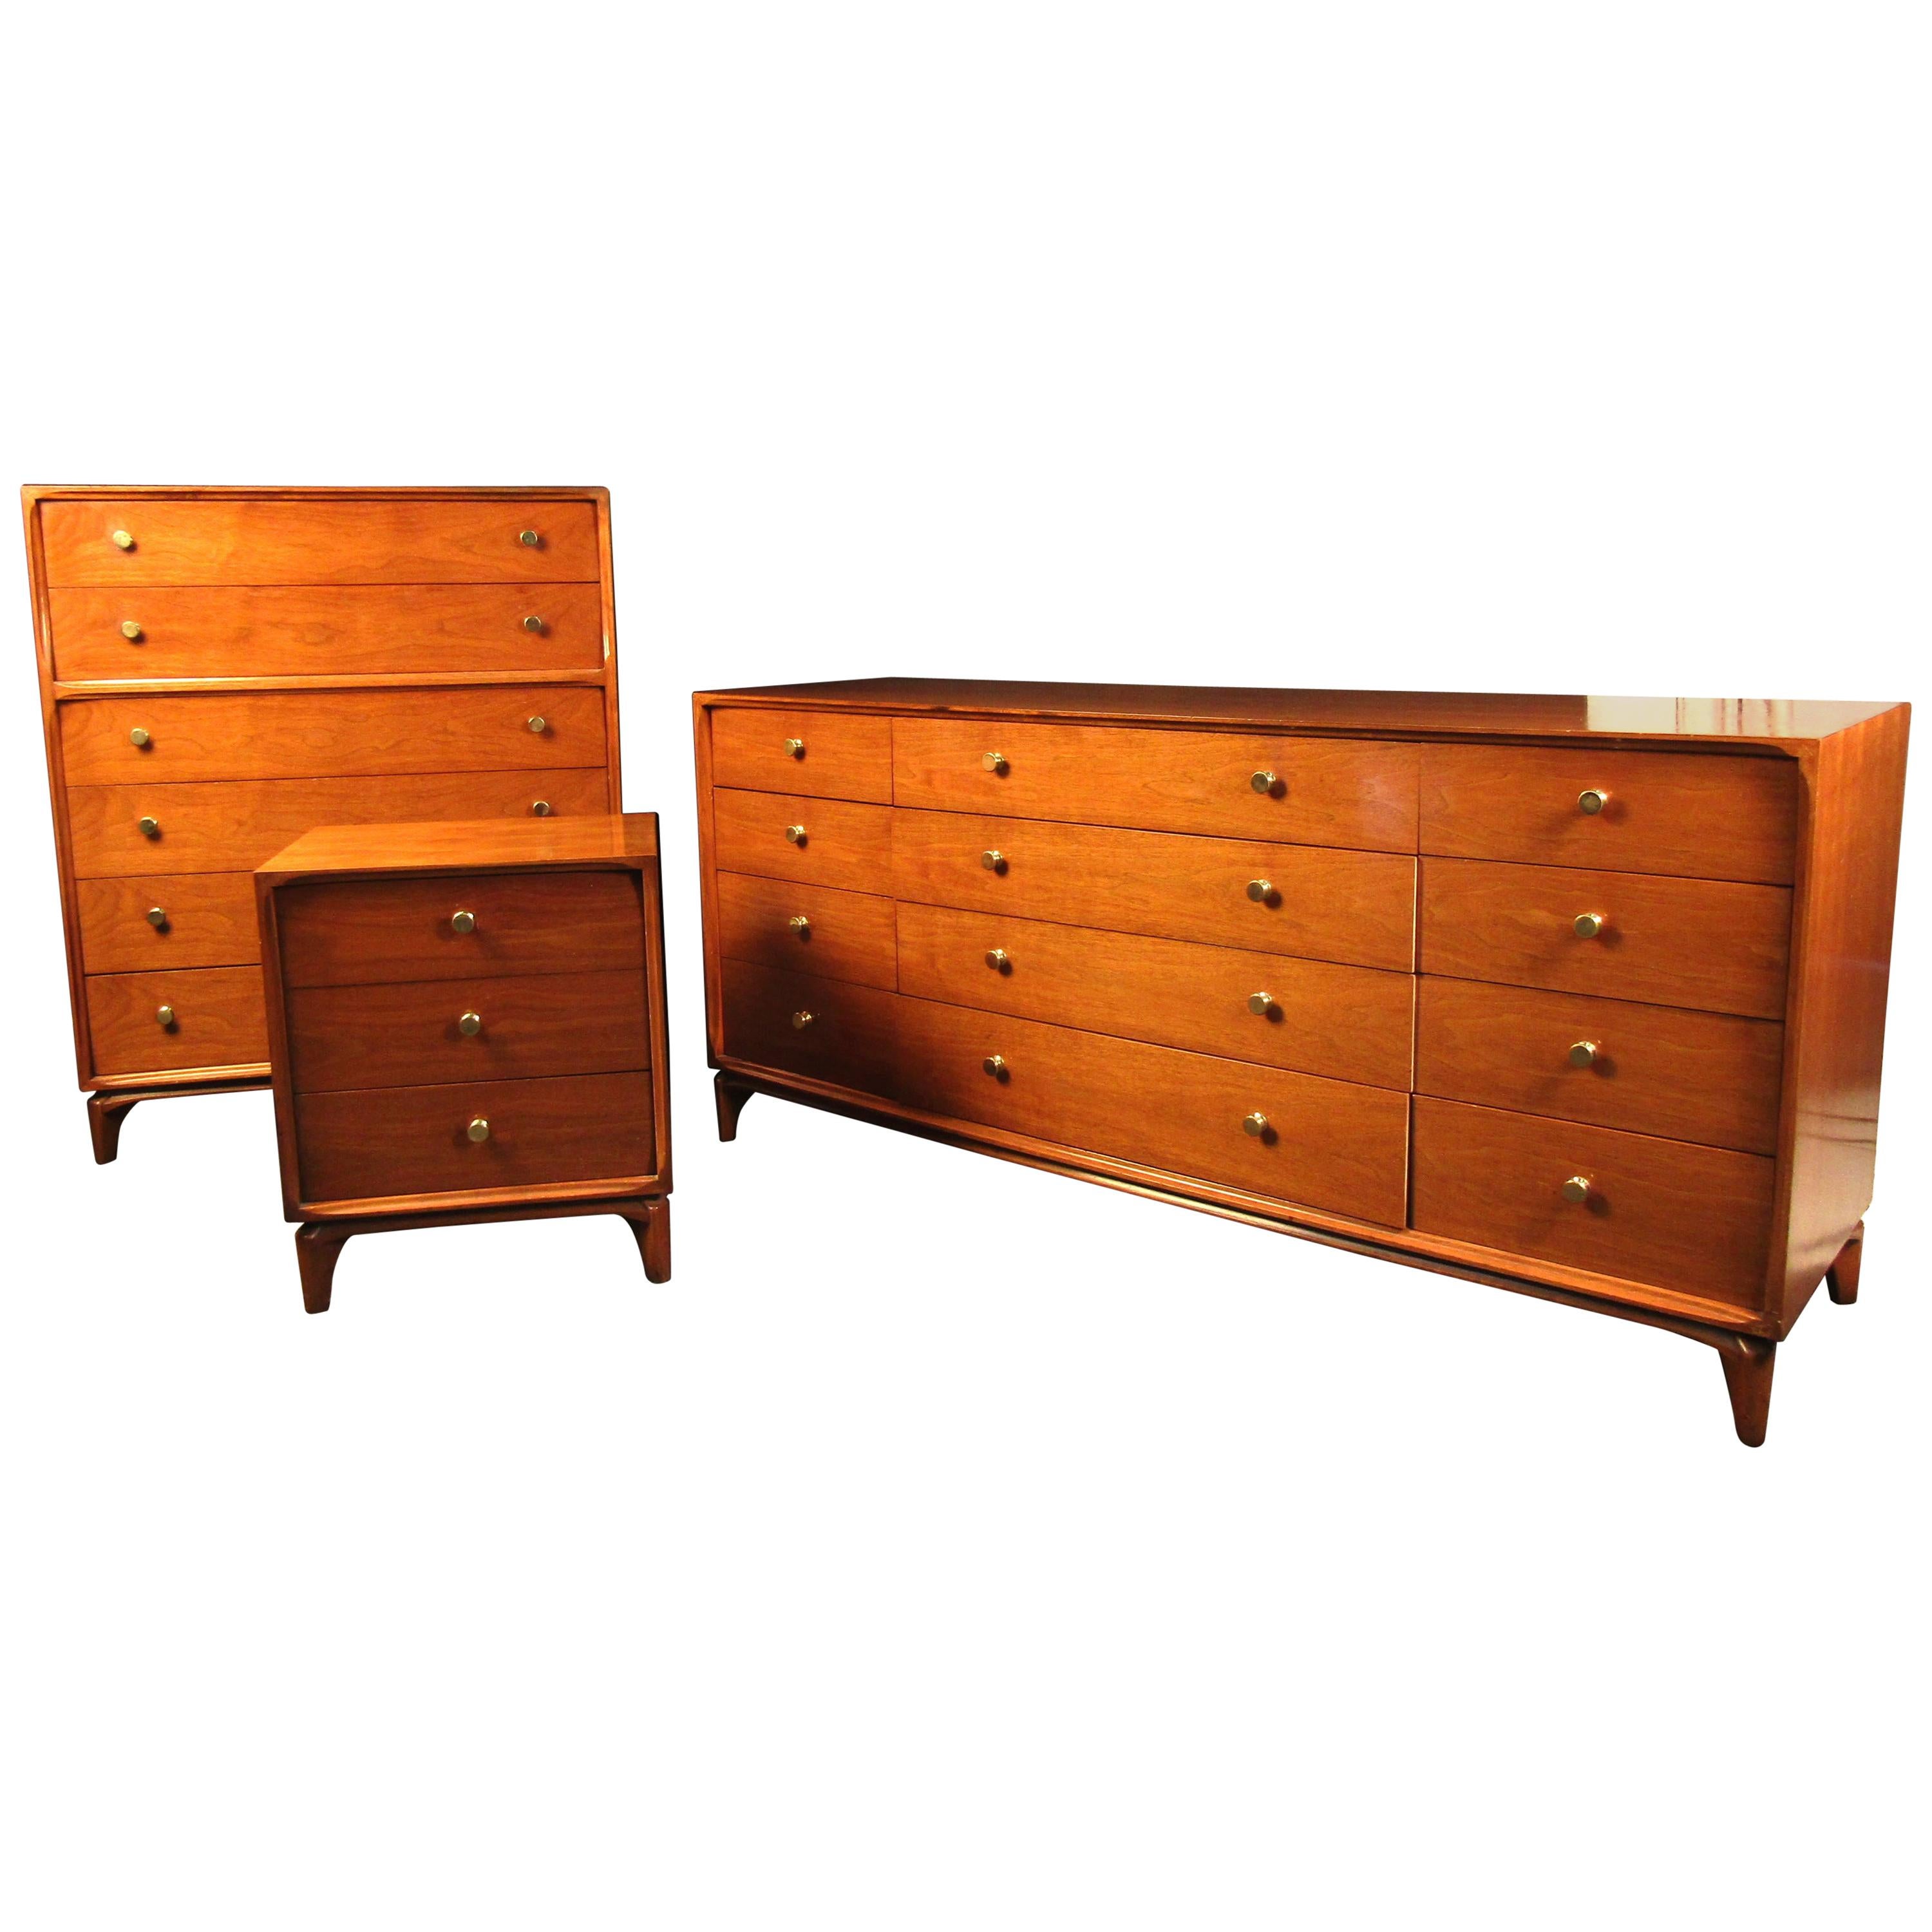 Stunning Mid-century Bedroom Set by "Exclusively Yours"